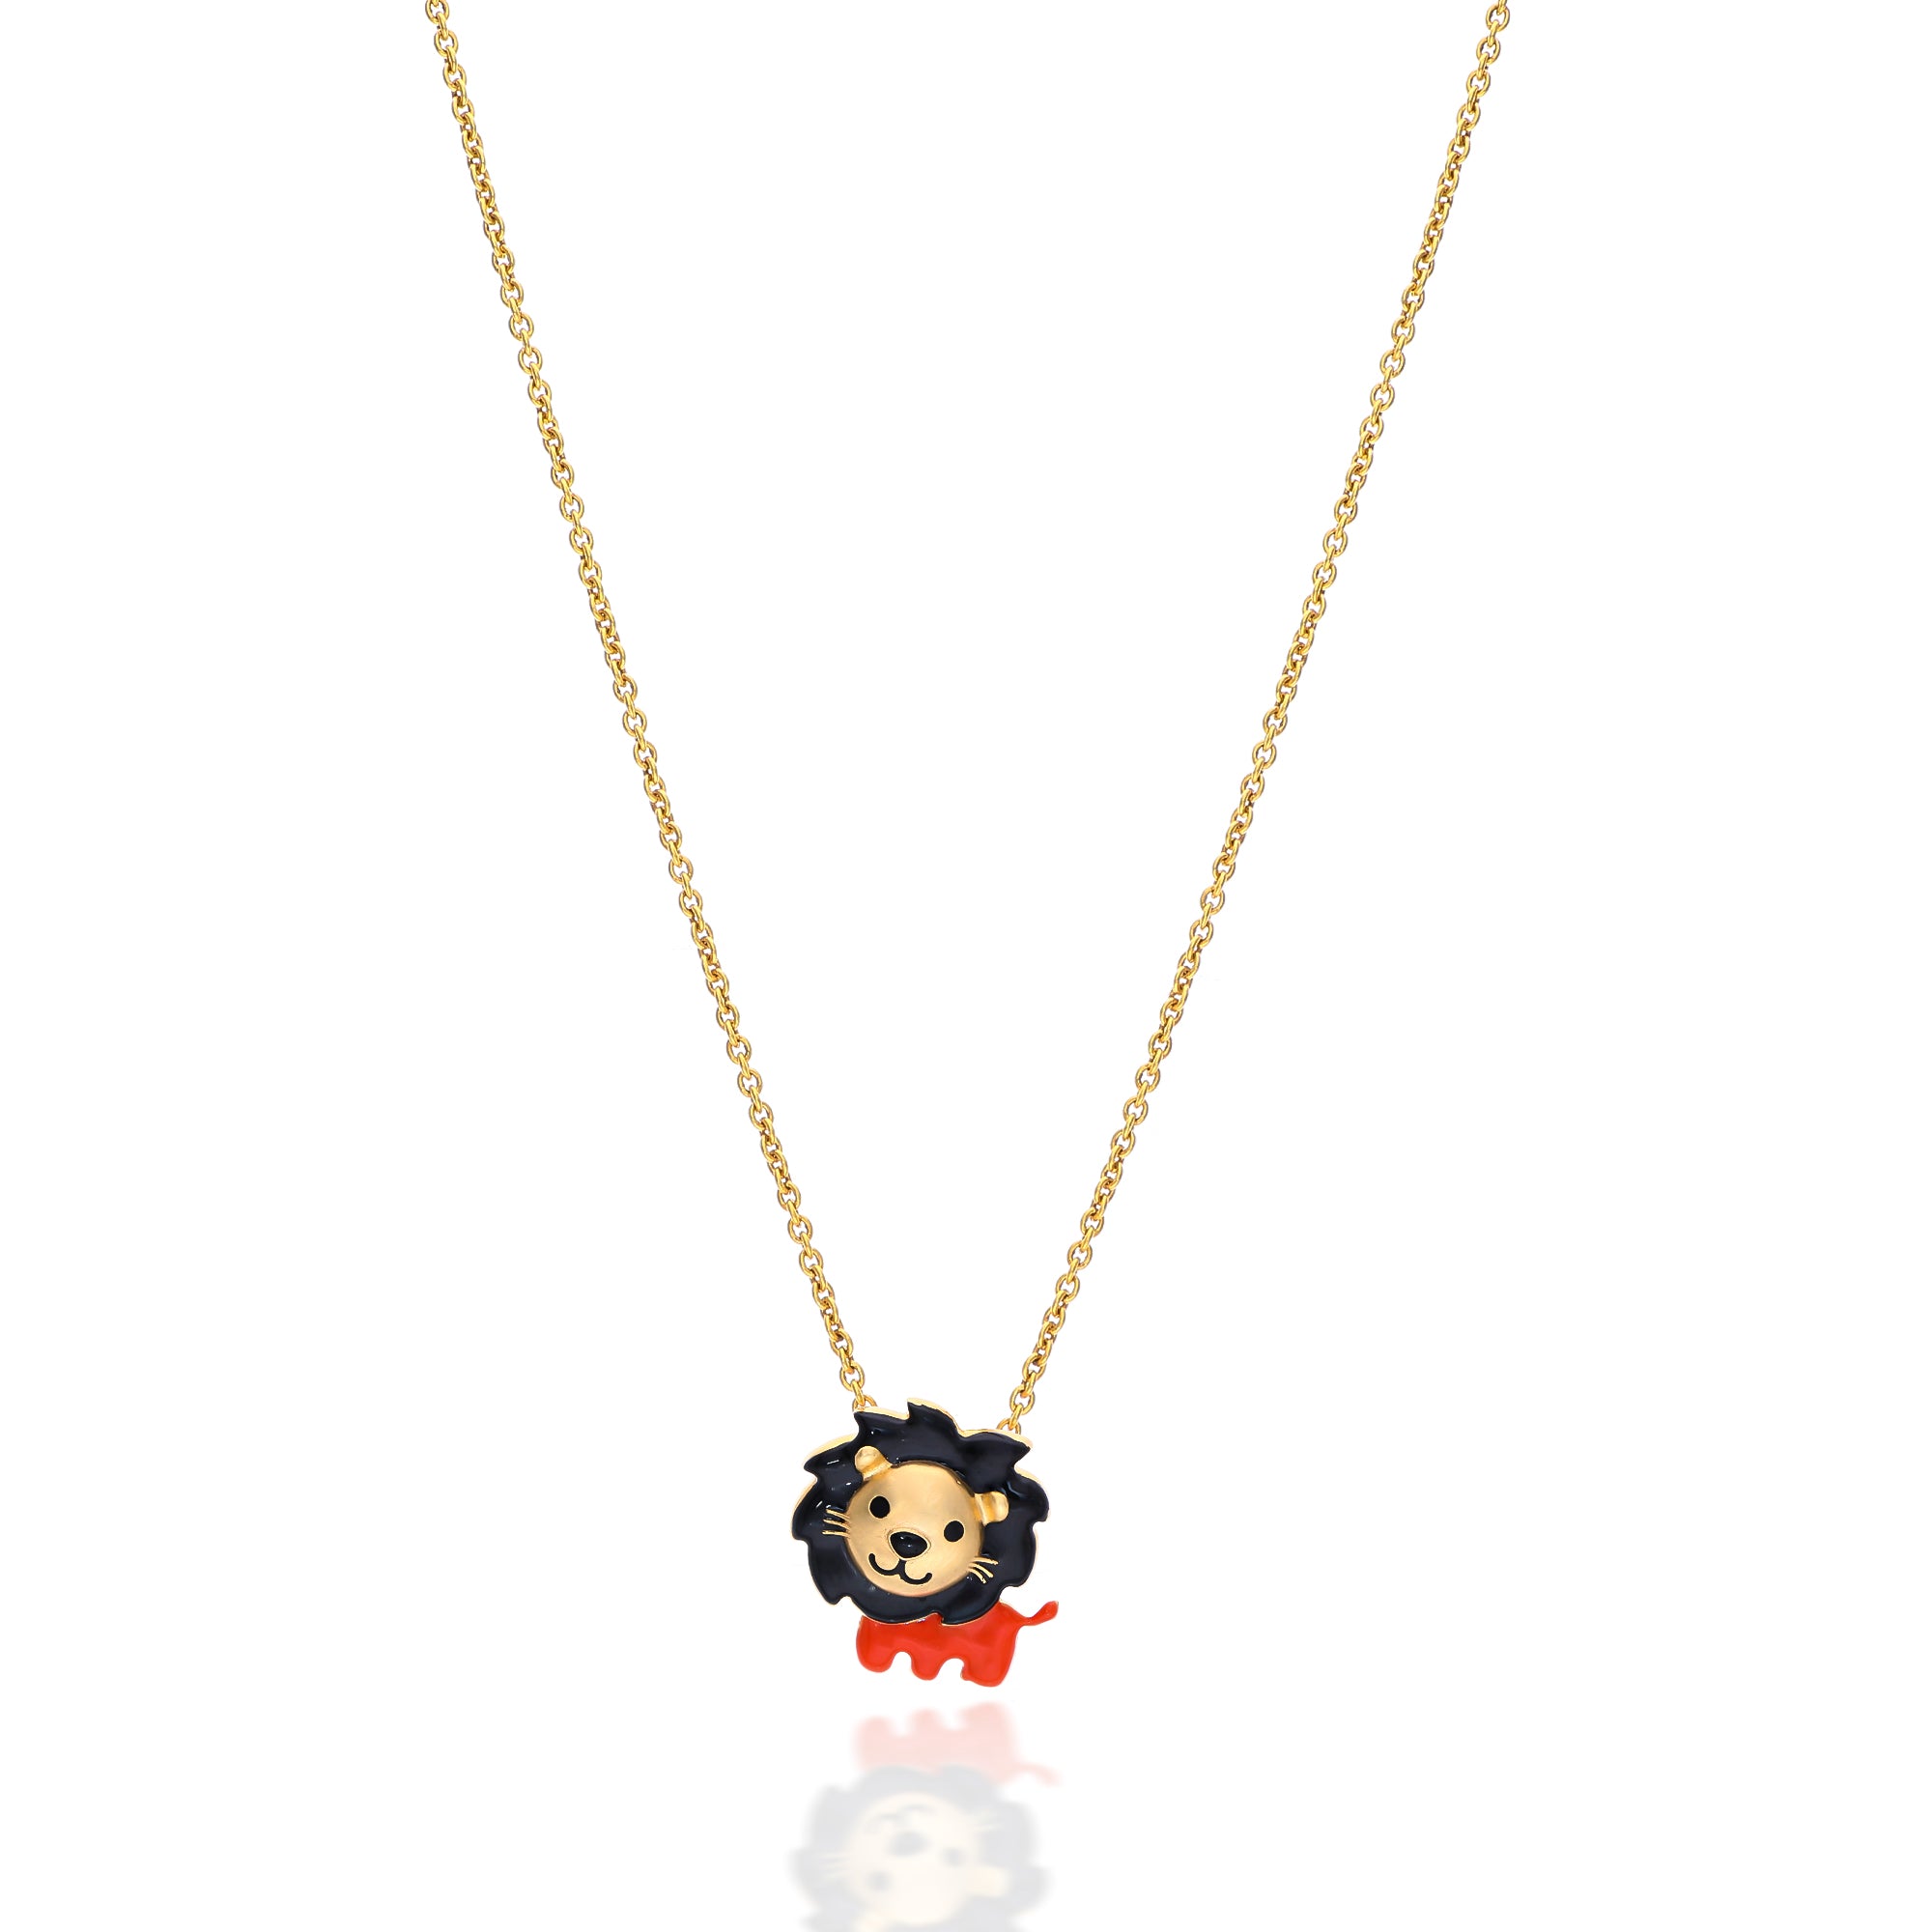 Adorable Lion Pendent with Chain